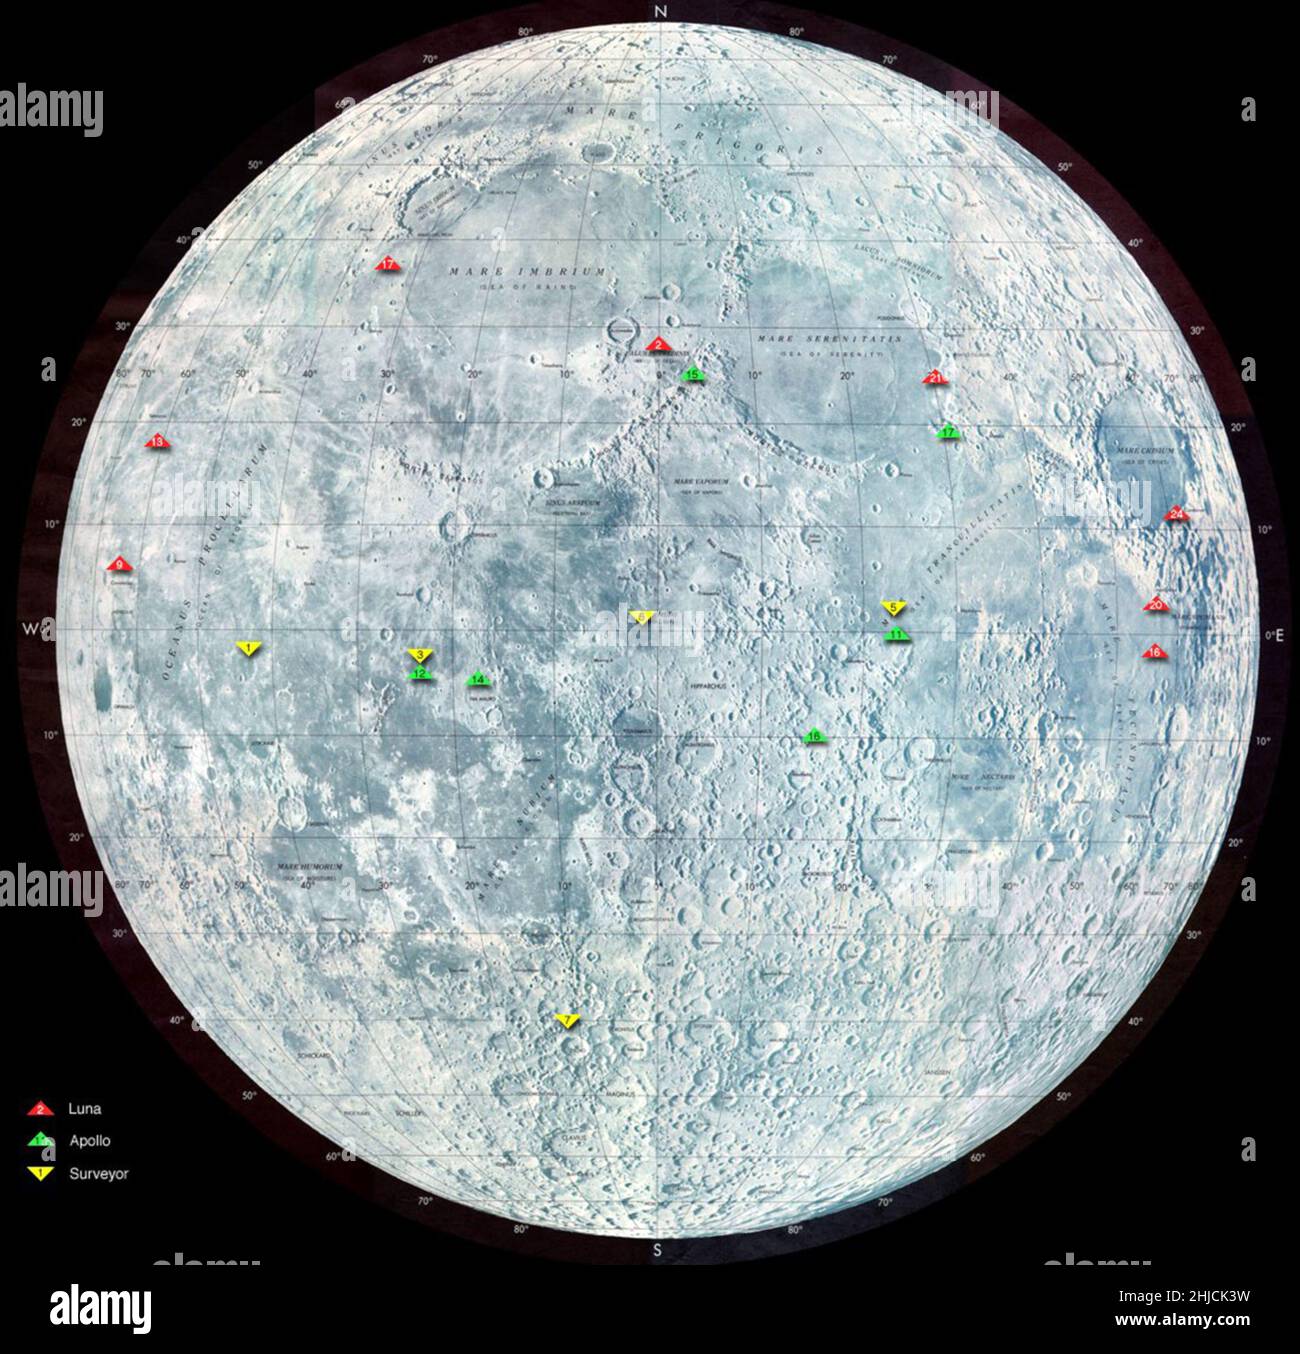 Map shows the locations of many spacecraft that have landed on the moon. Green triangles represent Apollo missions. Yellow are NASA Surveyor missions, and red are Russian Luna spacecraft. One of the Lunar Reconnaissance Orbiter's missions is to search for potential landing sites for future manned missions to the moon. Stock Photo